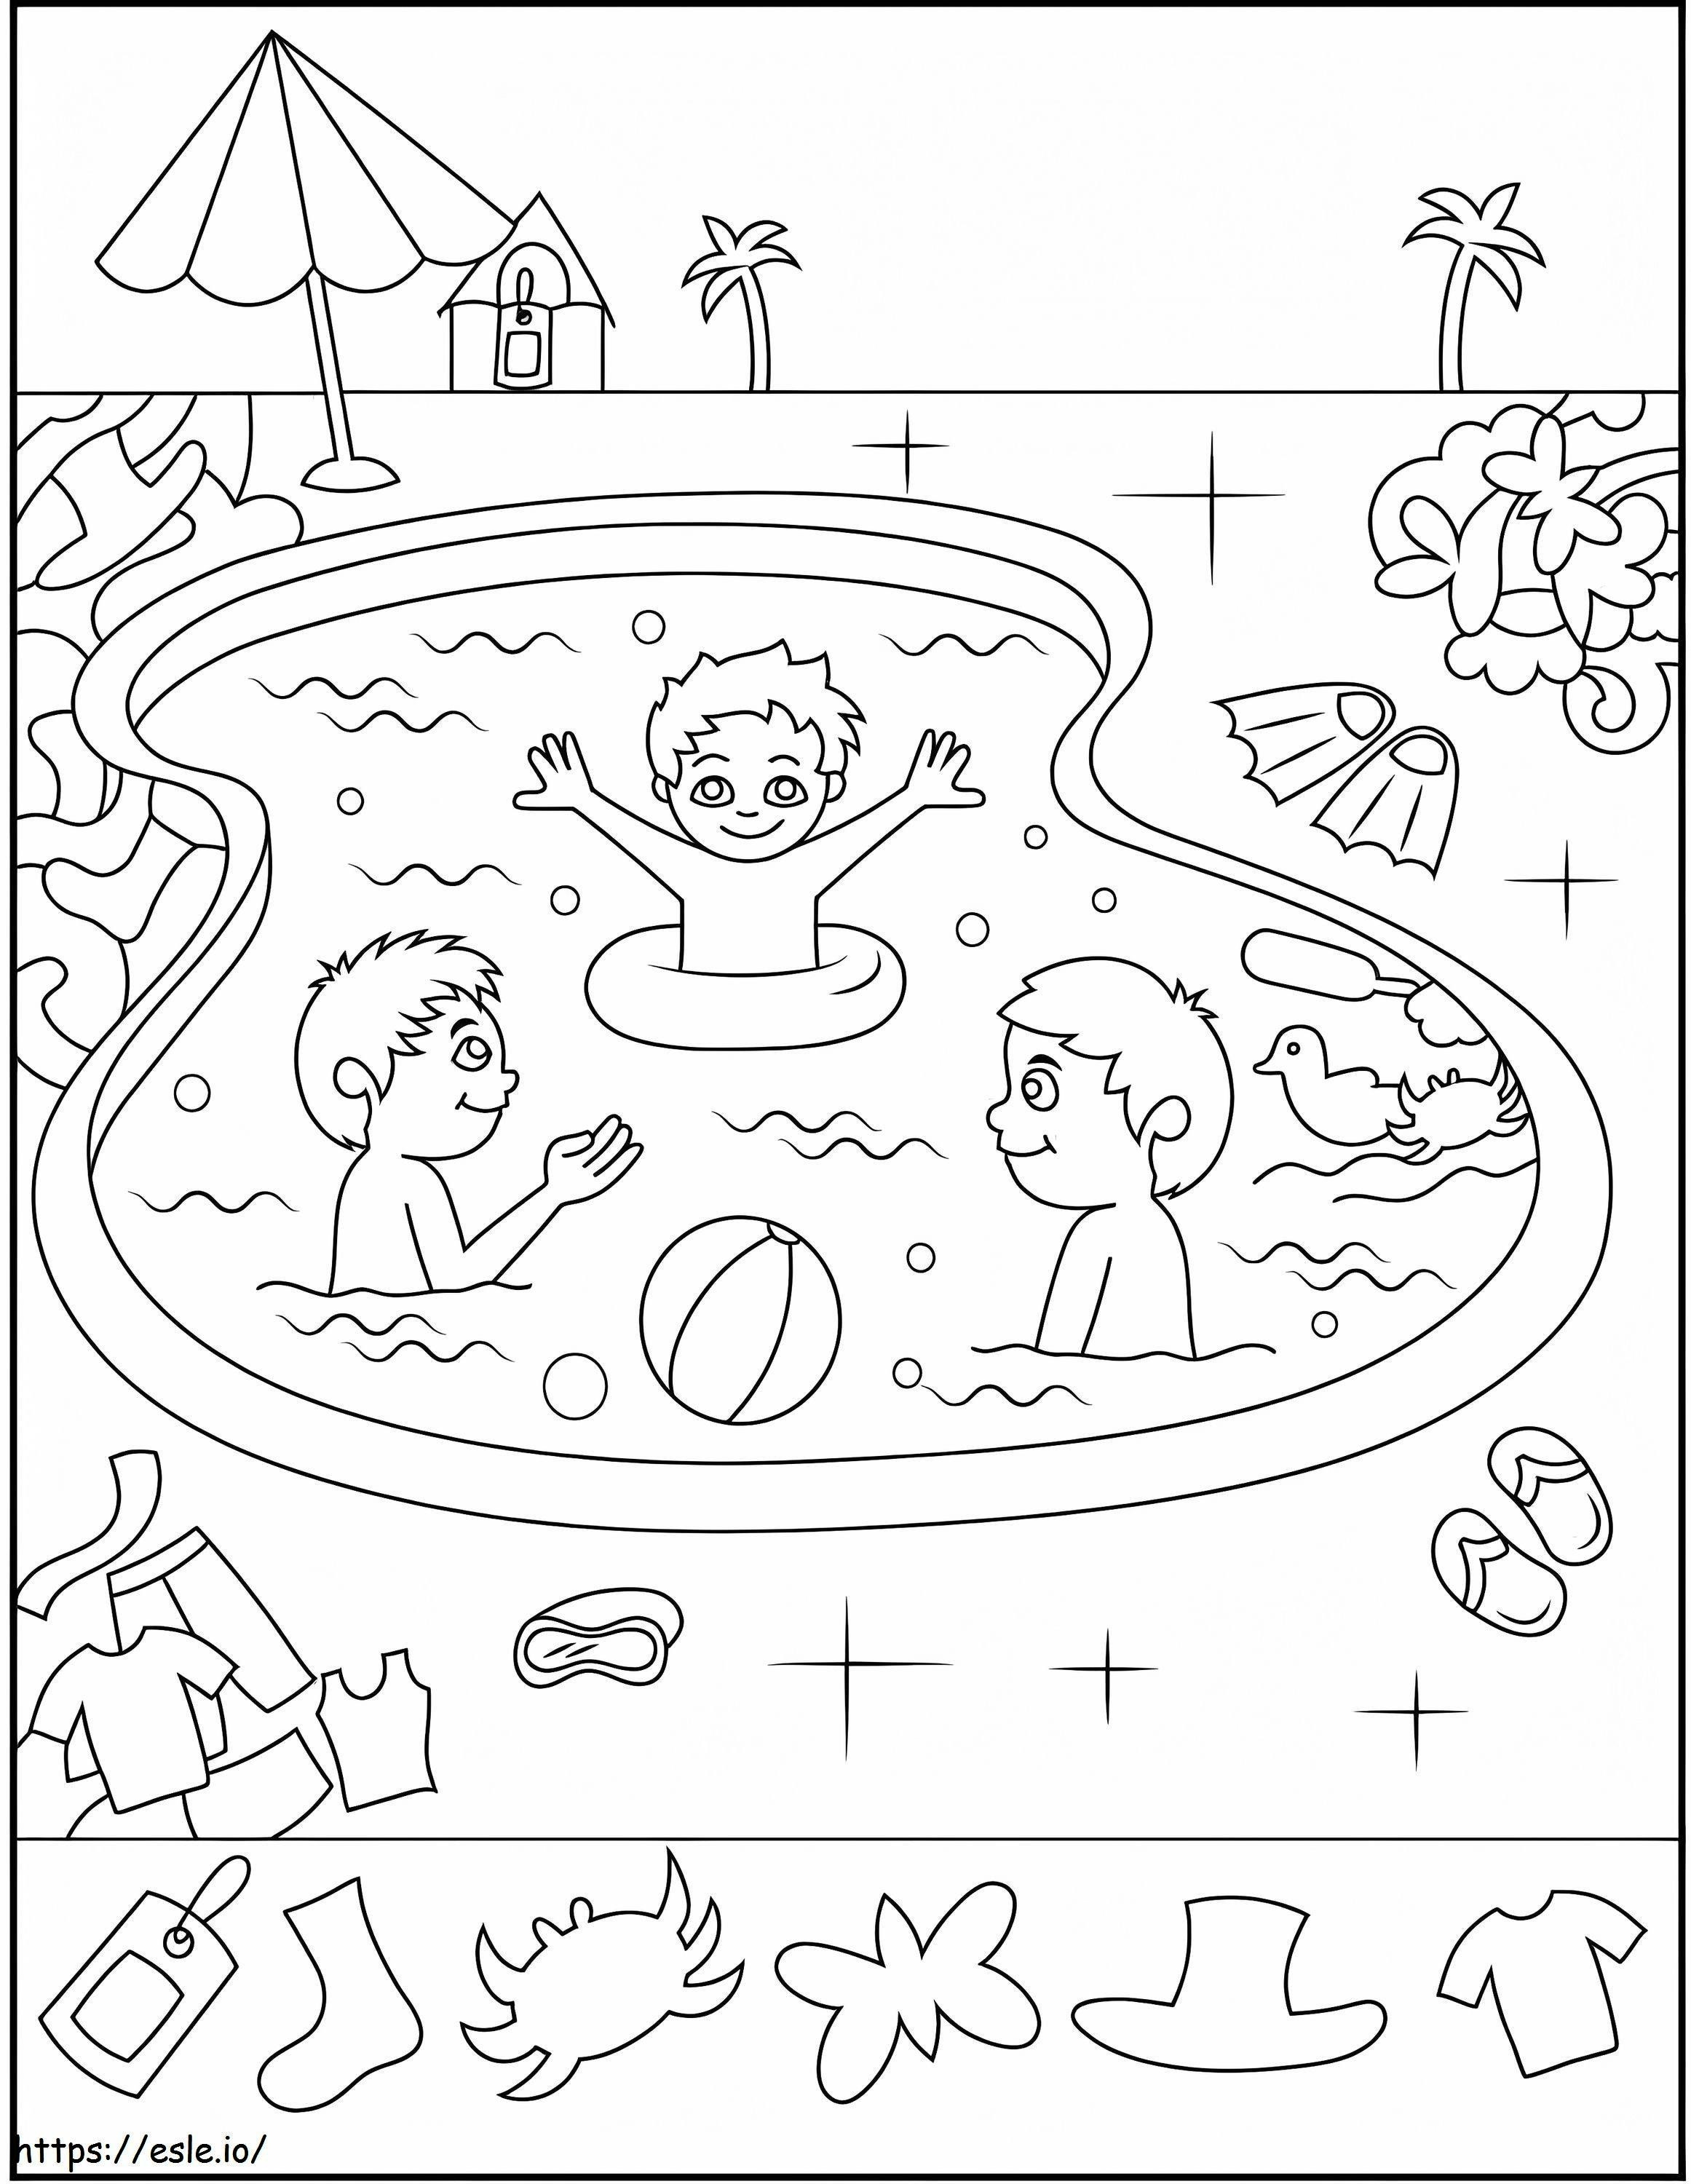 Children In Pool coloring page